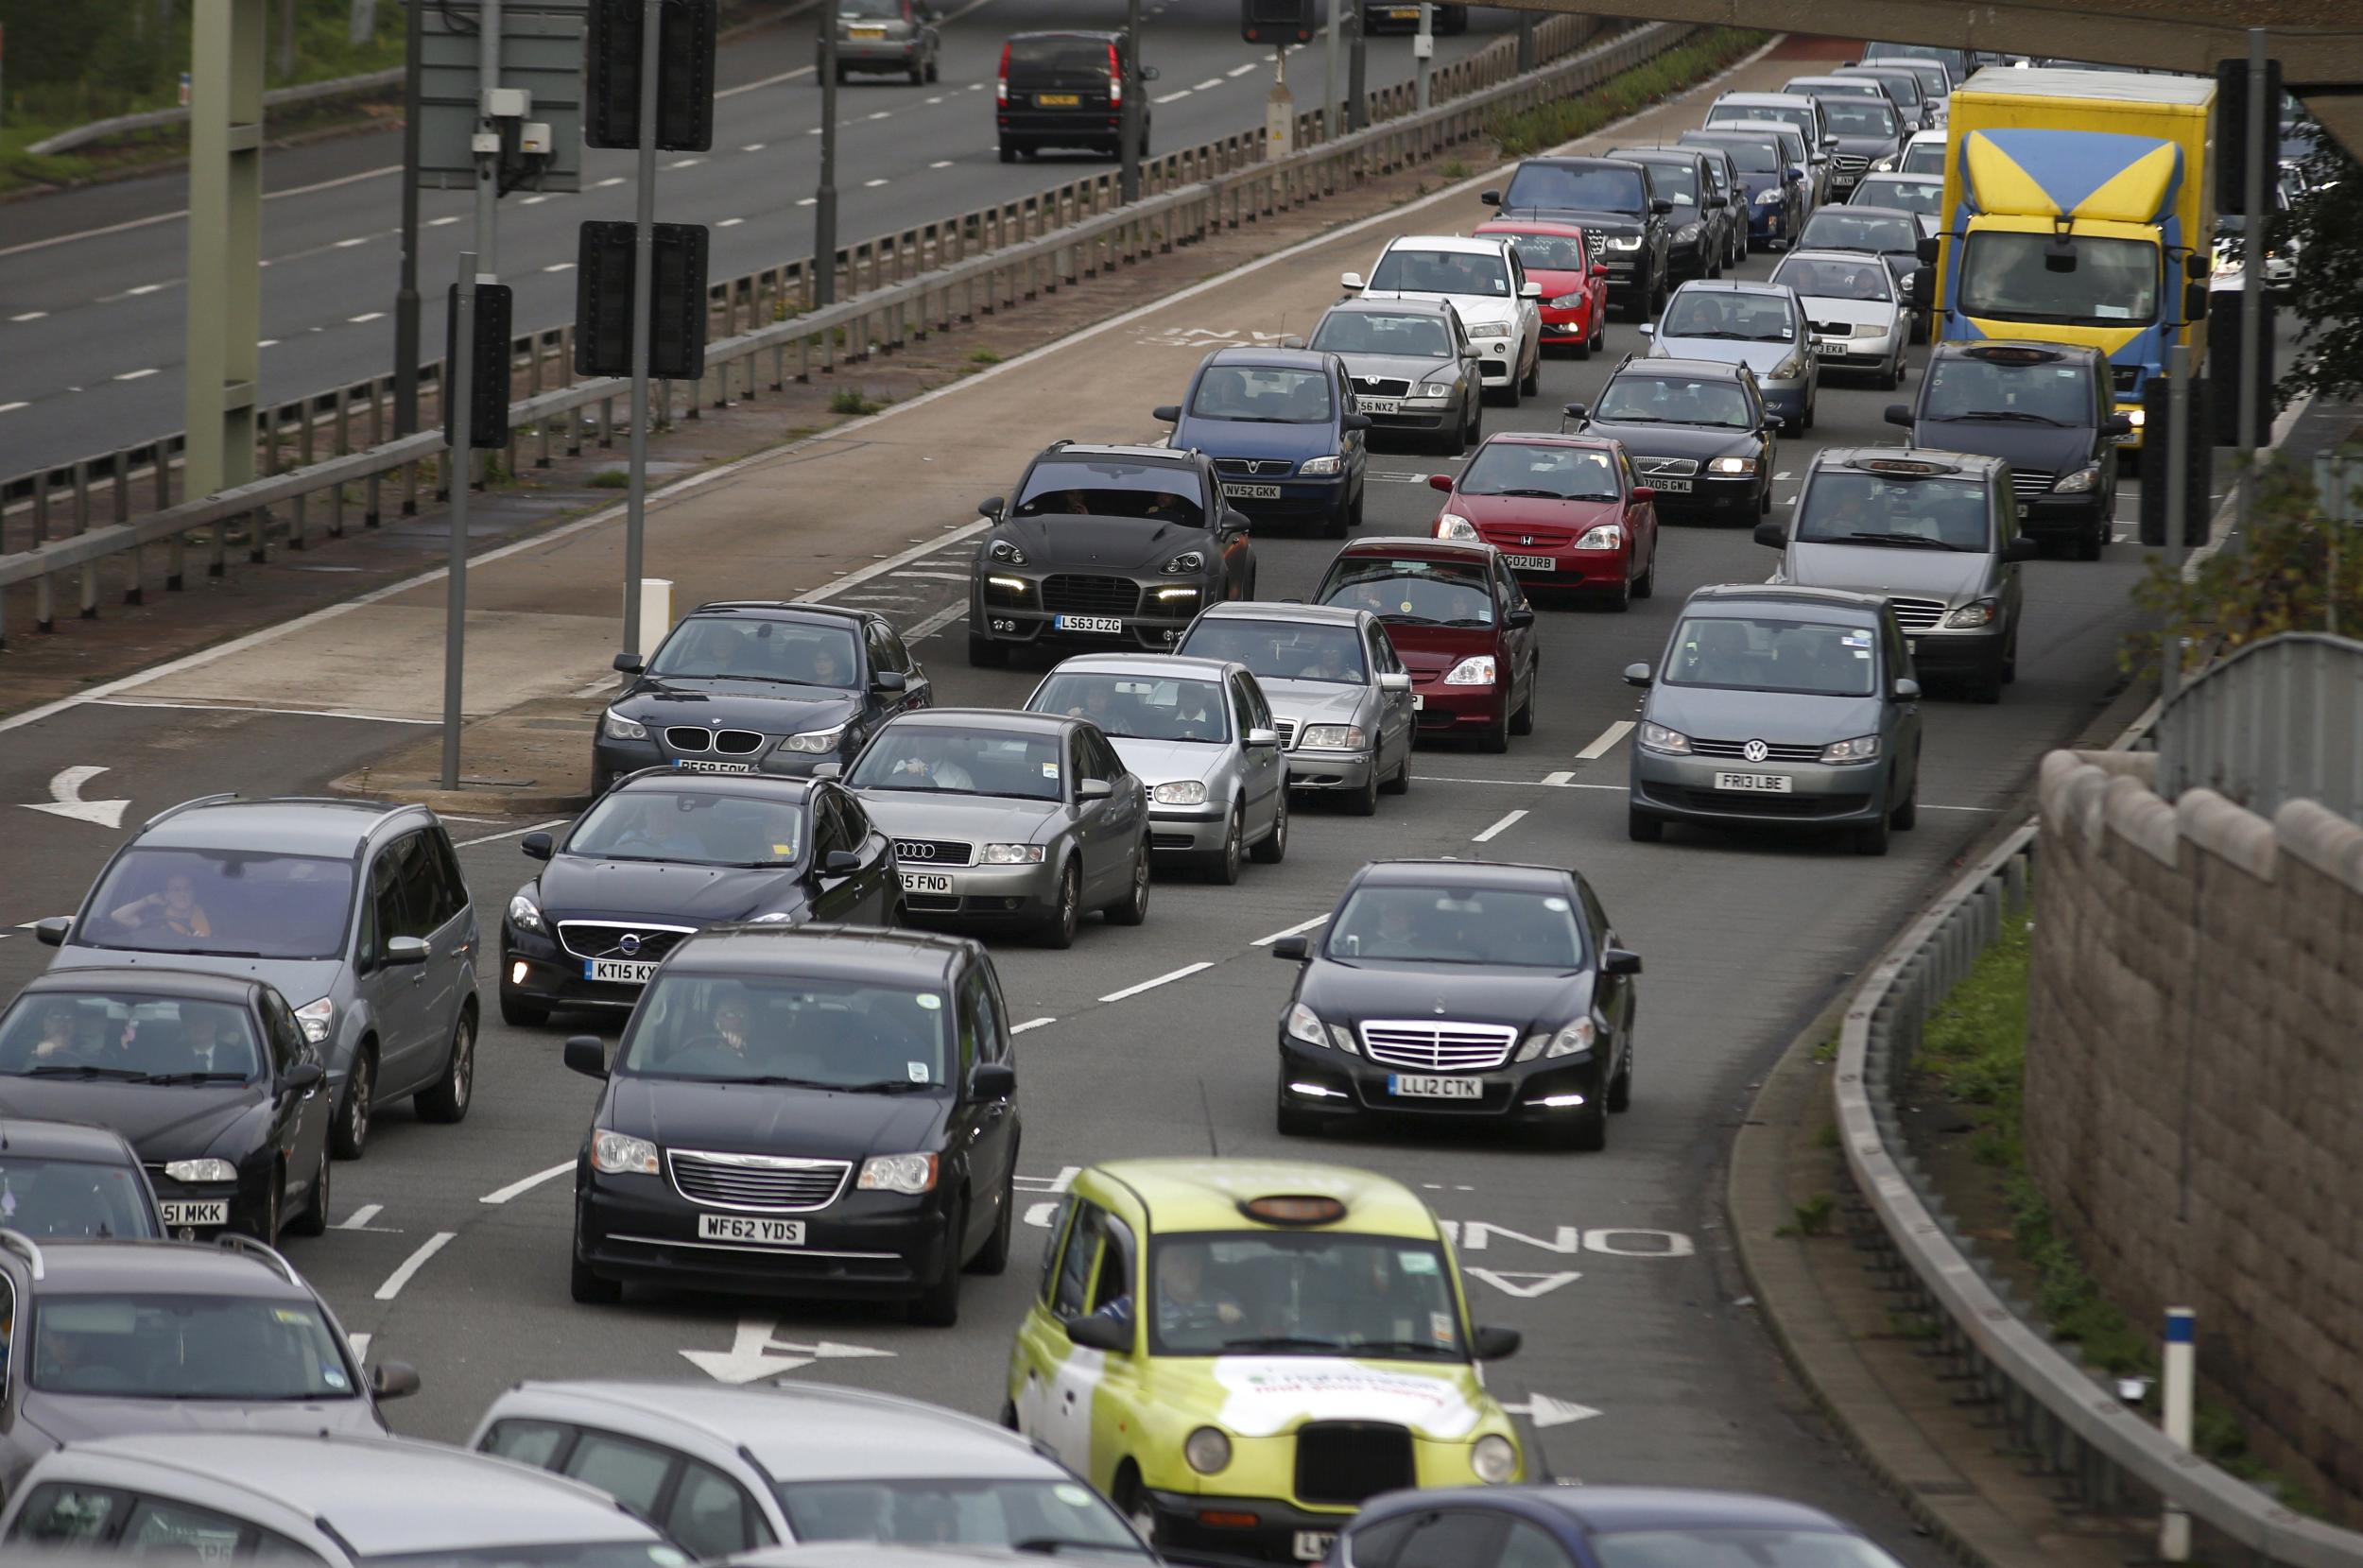 Traffic is a growing problem in cities worldwide